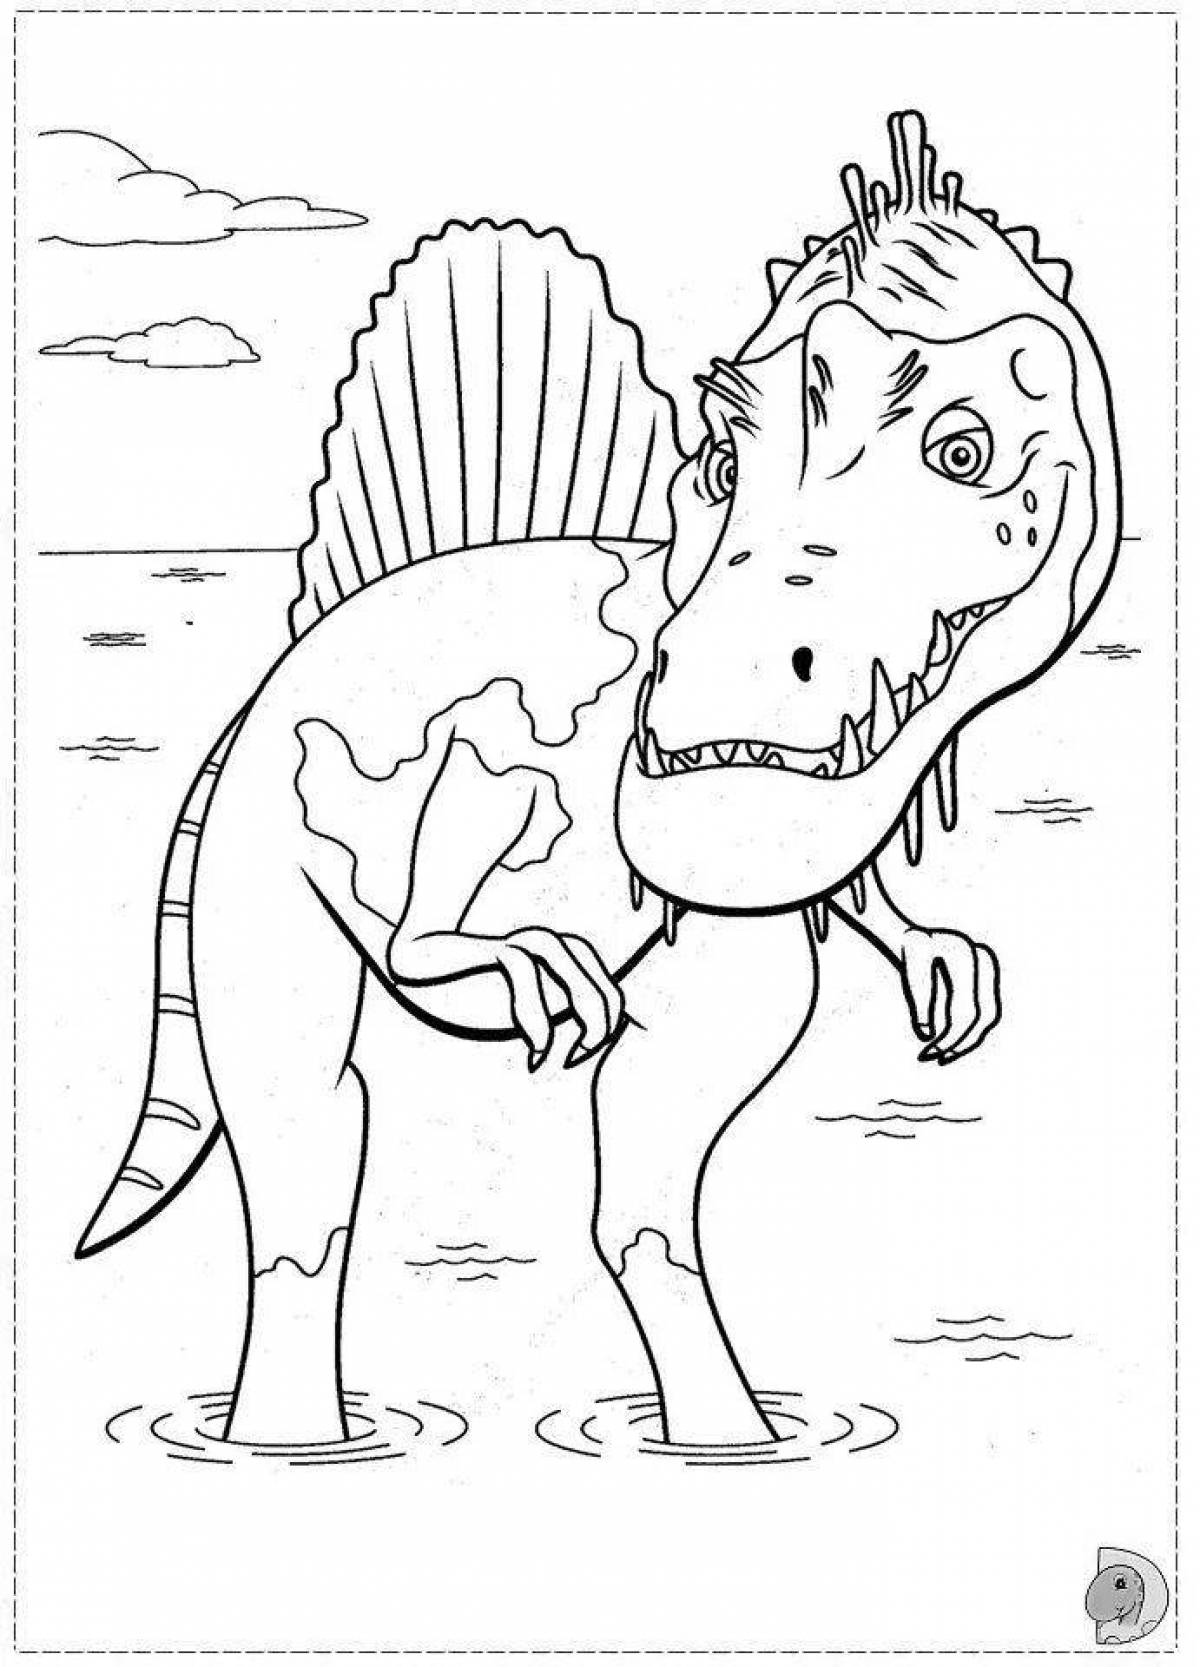 Playful dino city coloring page